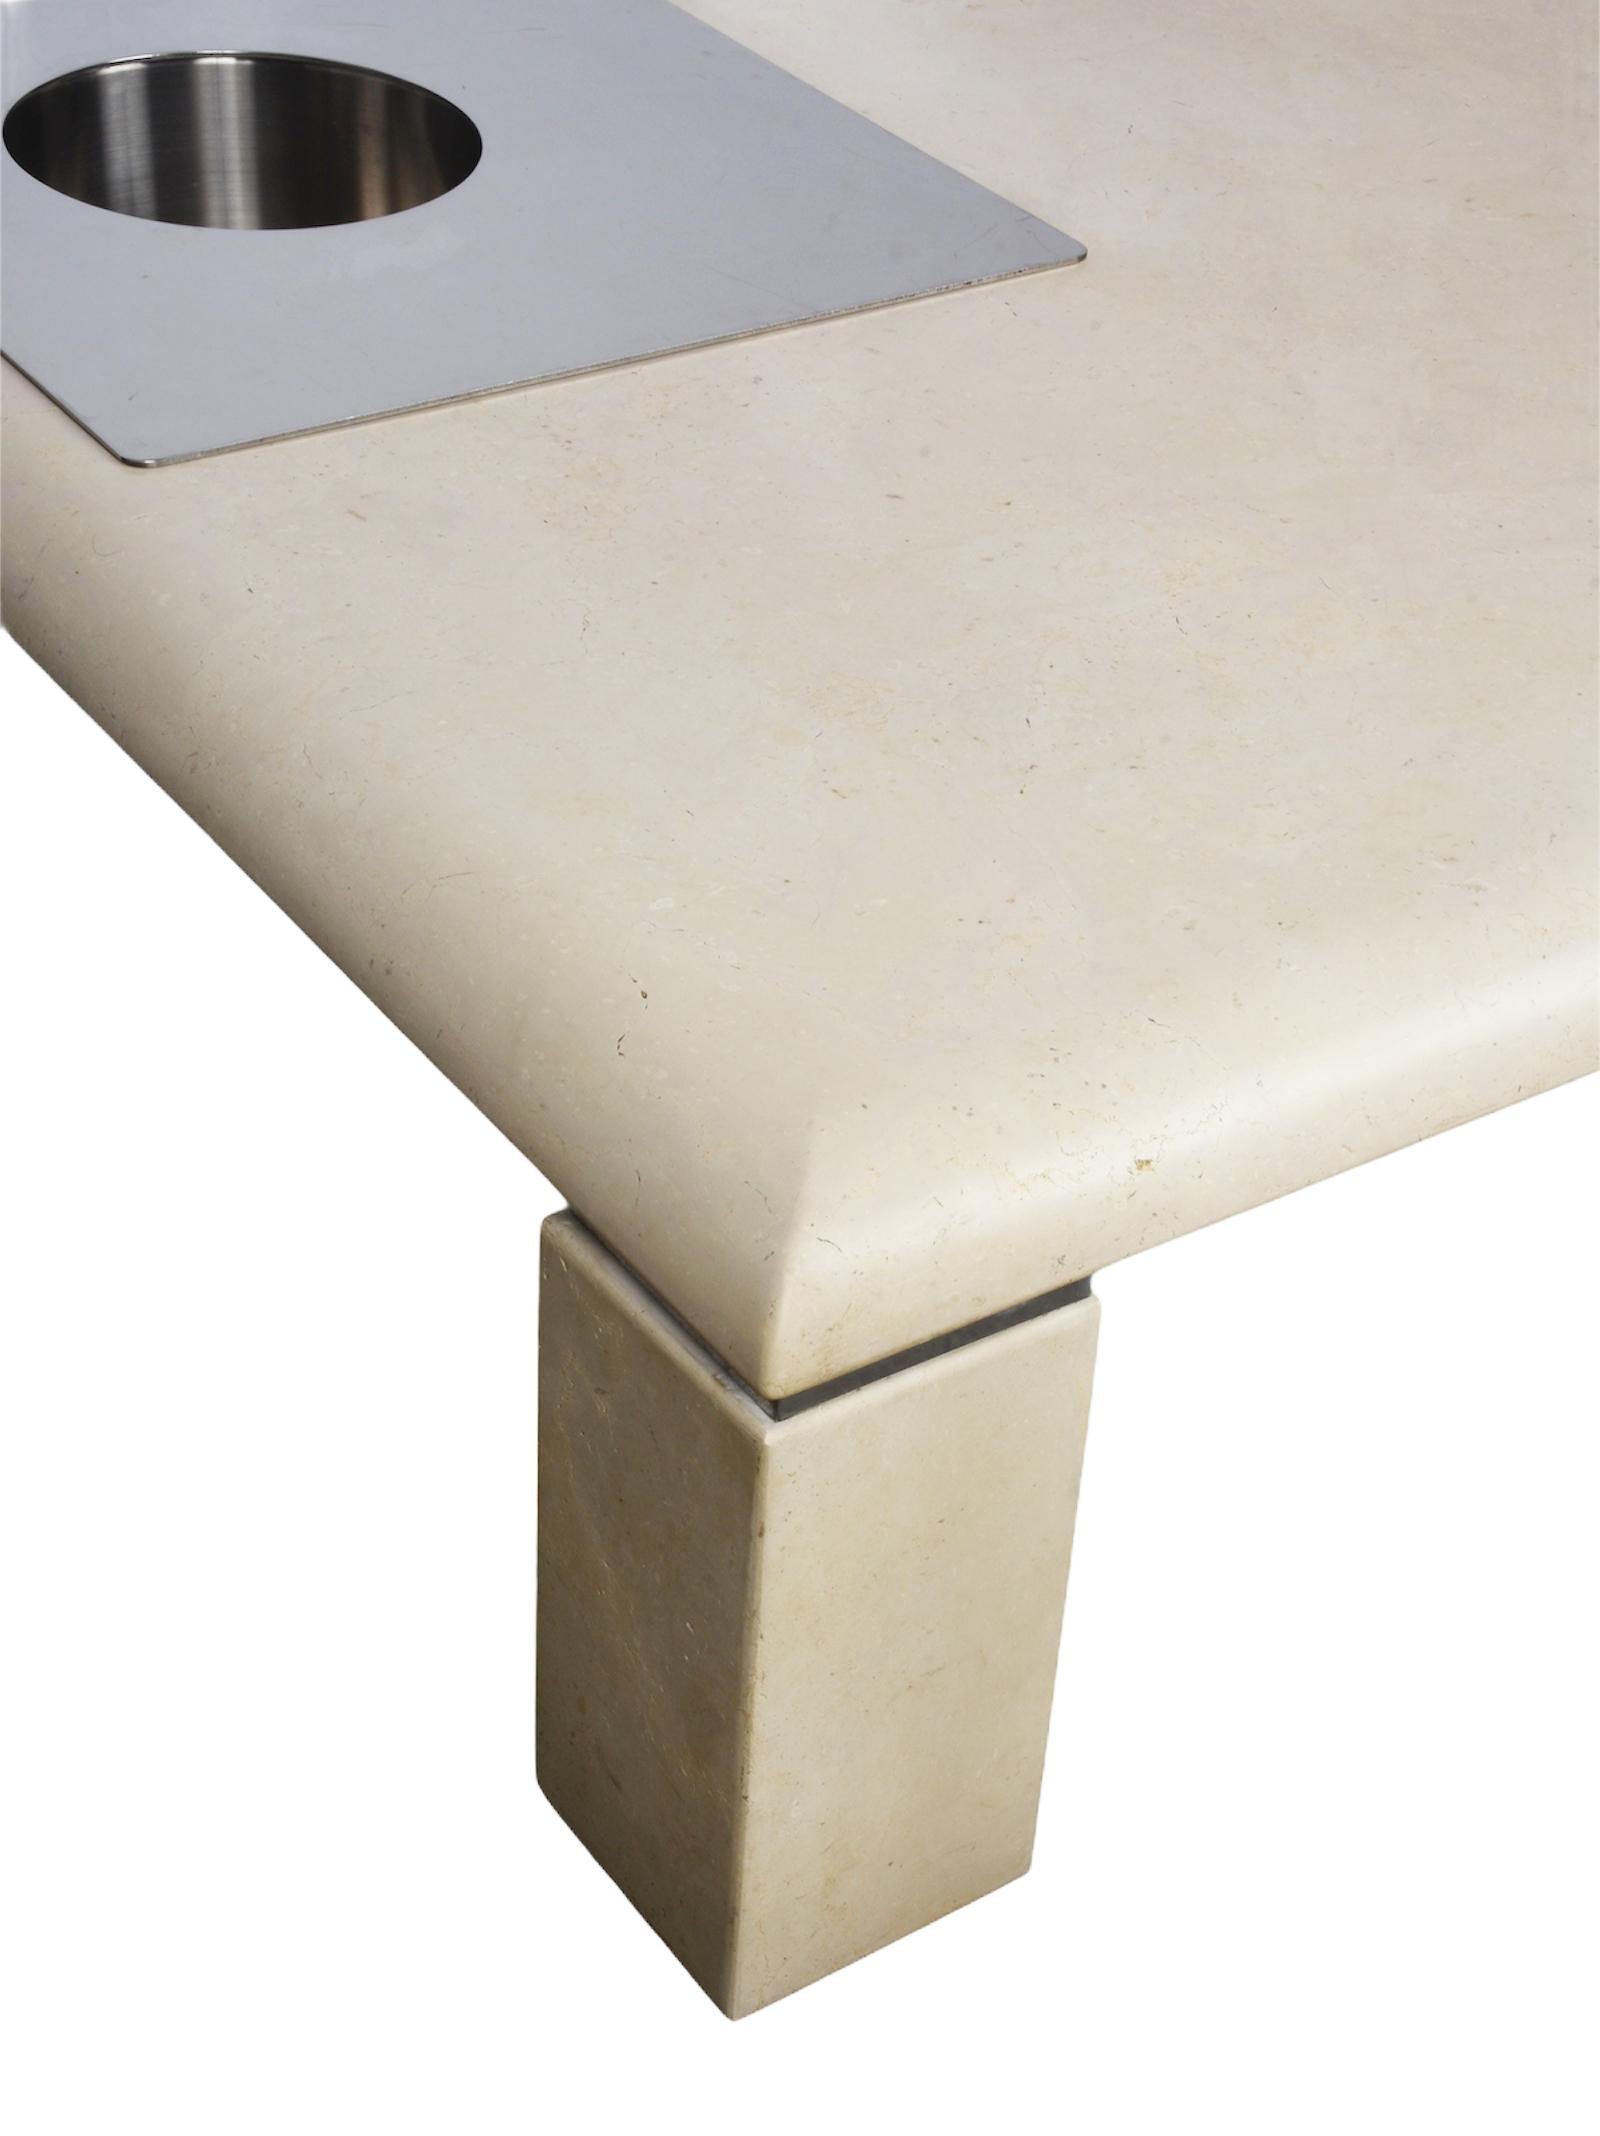 Willy Rizzo Italian Squared White Botticino Marble and Steel Coffee Table, 1970 For Sale 4